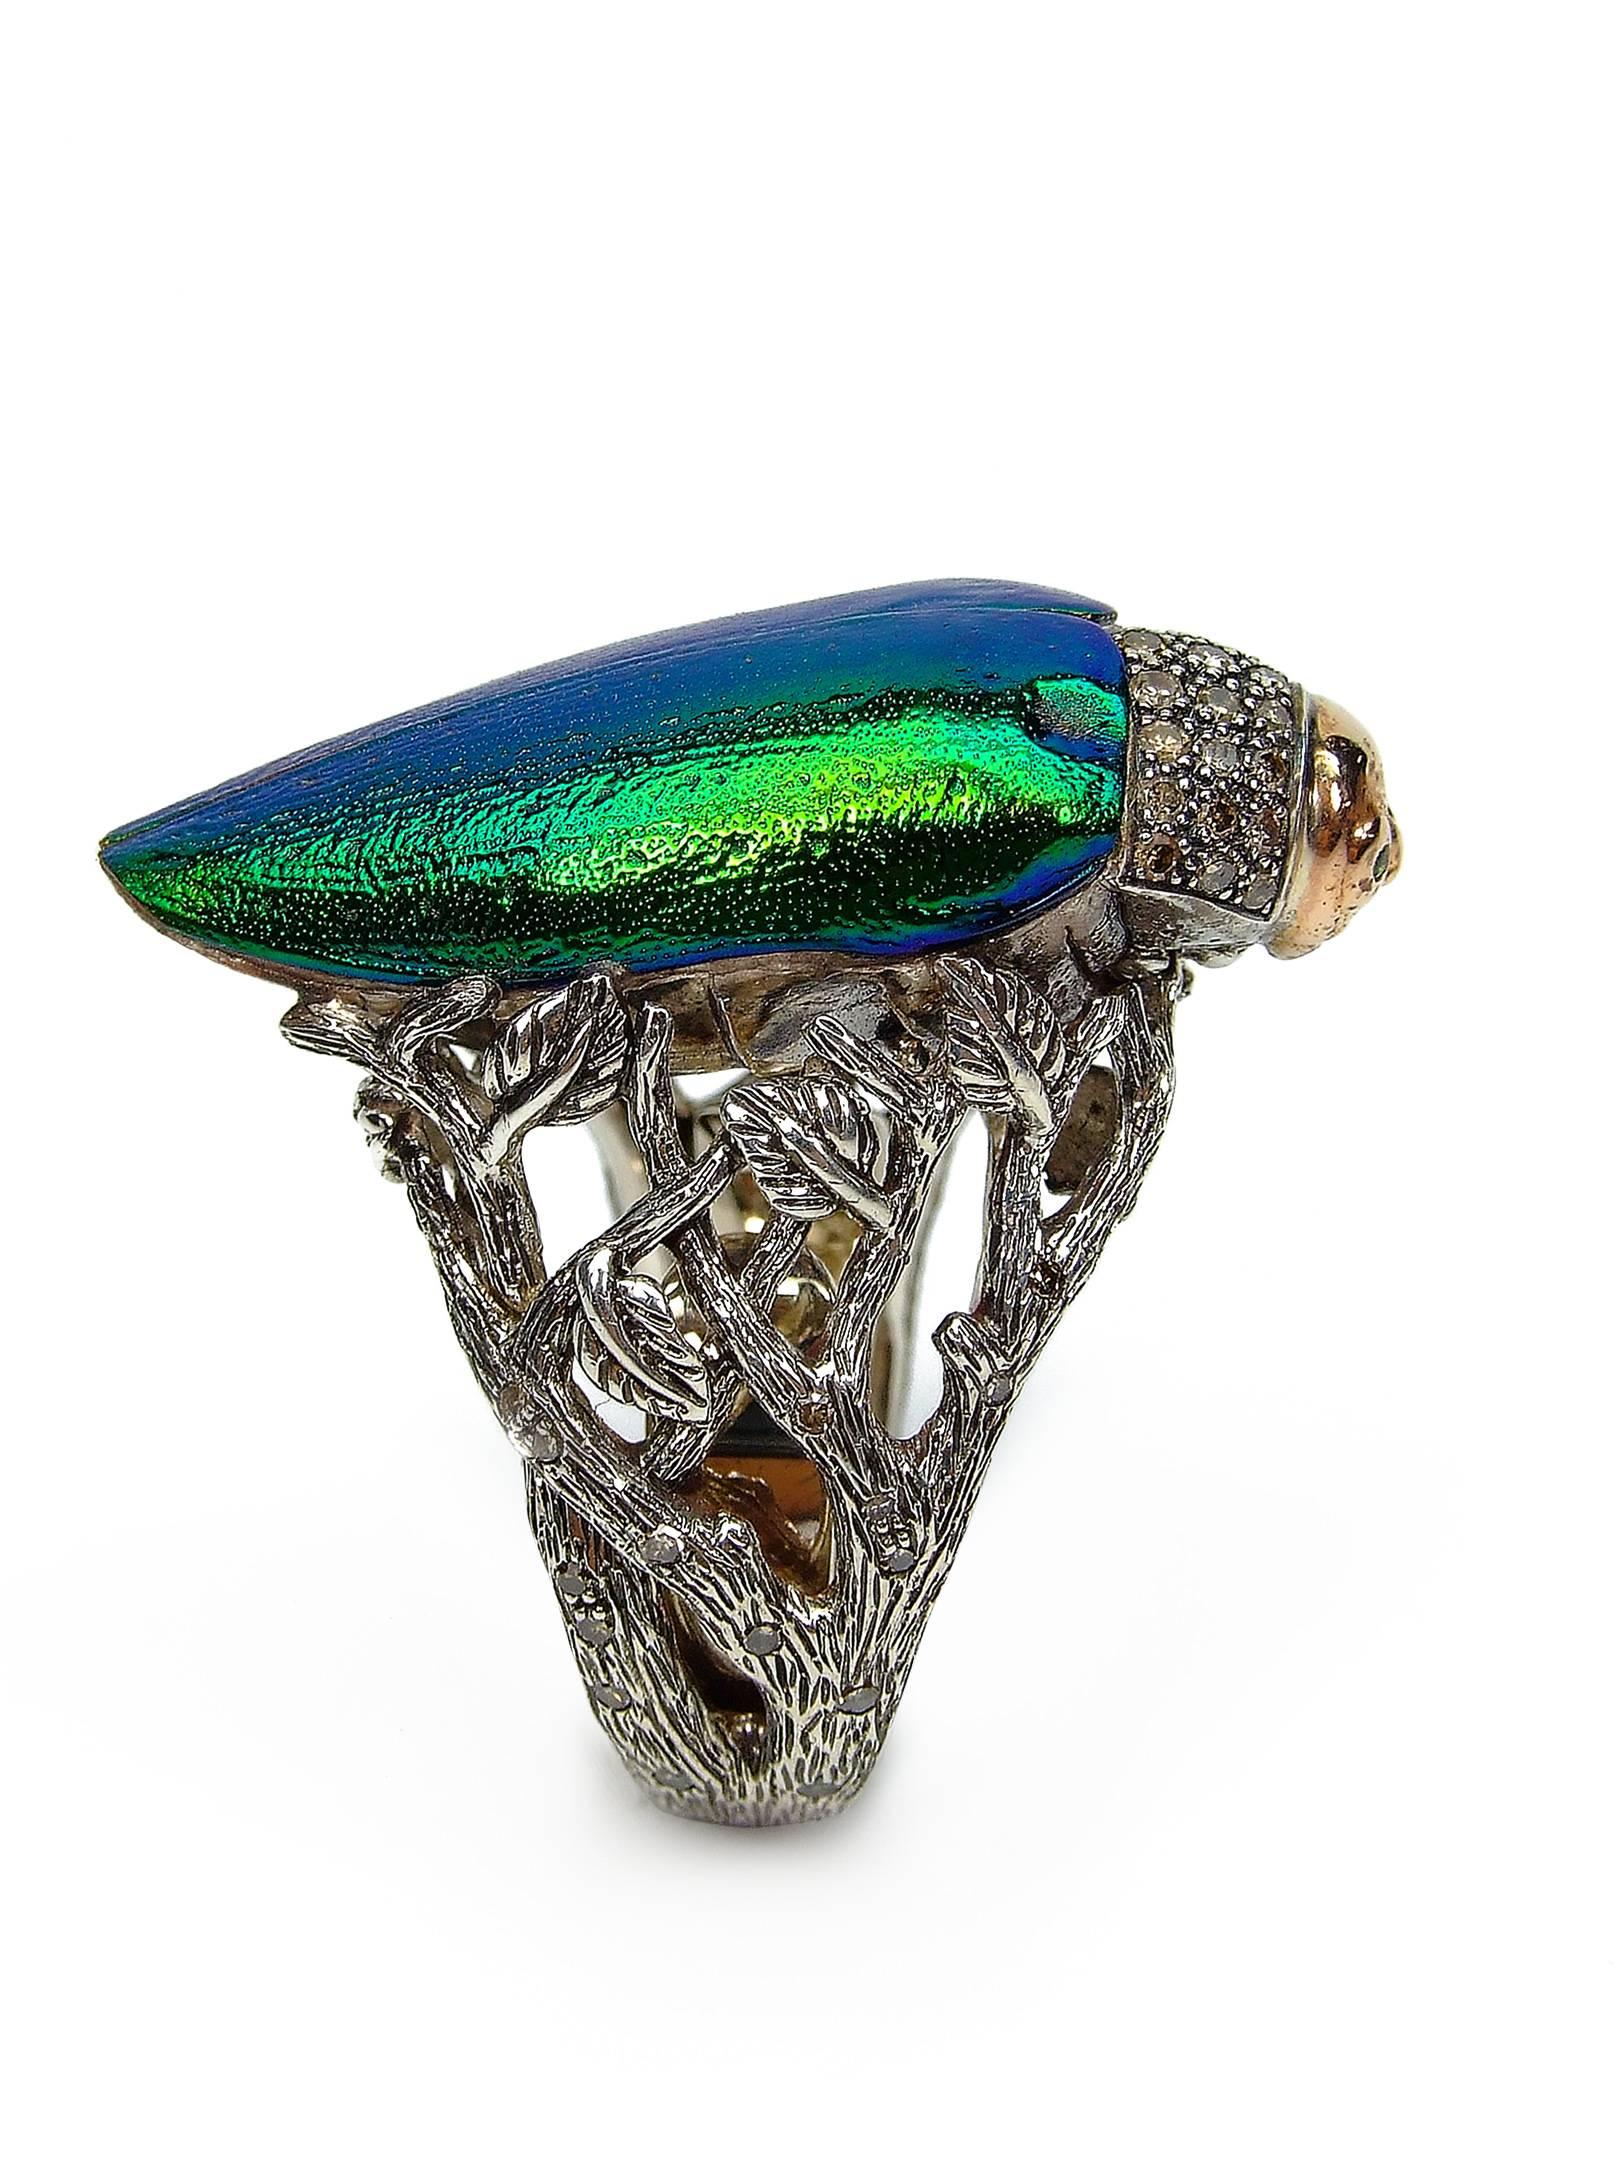 The Scarab Ring by Bibi van der Velden, from her signature Scarab collection, features completely natural recycled scarab beetle wings, set in diamond-set sterling silver and solid 18k rose gold. The beetle even includes green Tsavorite eyes. The